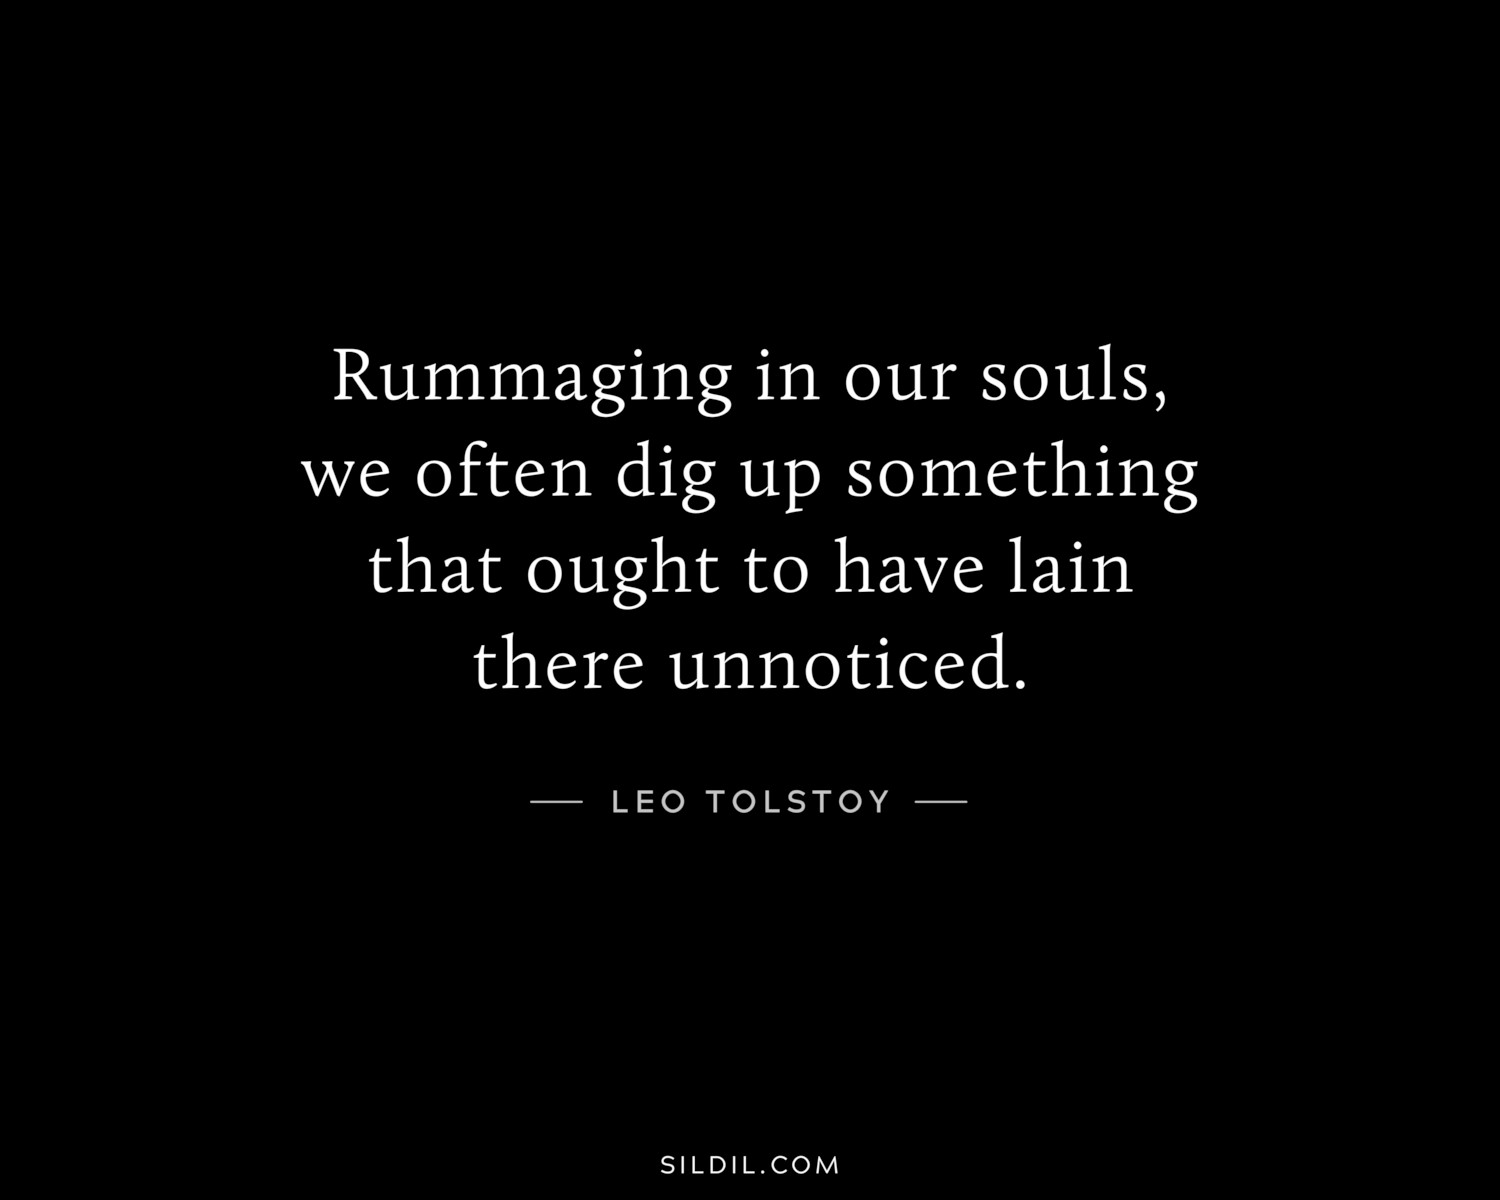 Rummaging in our souls, we often dig up something that ought to have lain there unnoticed.